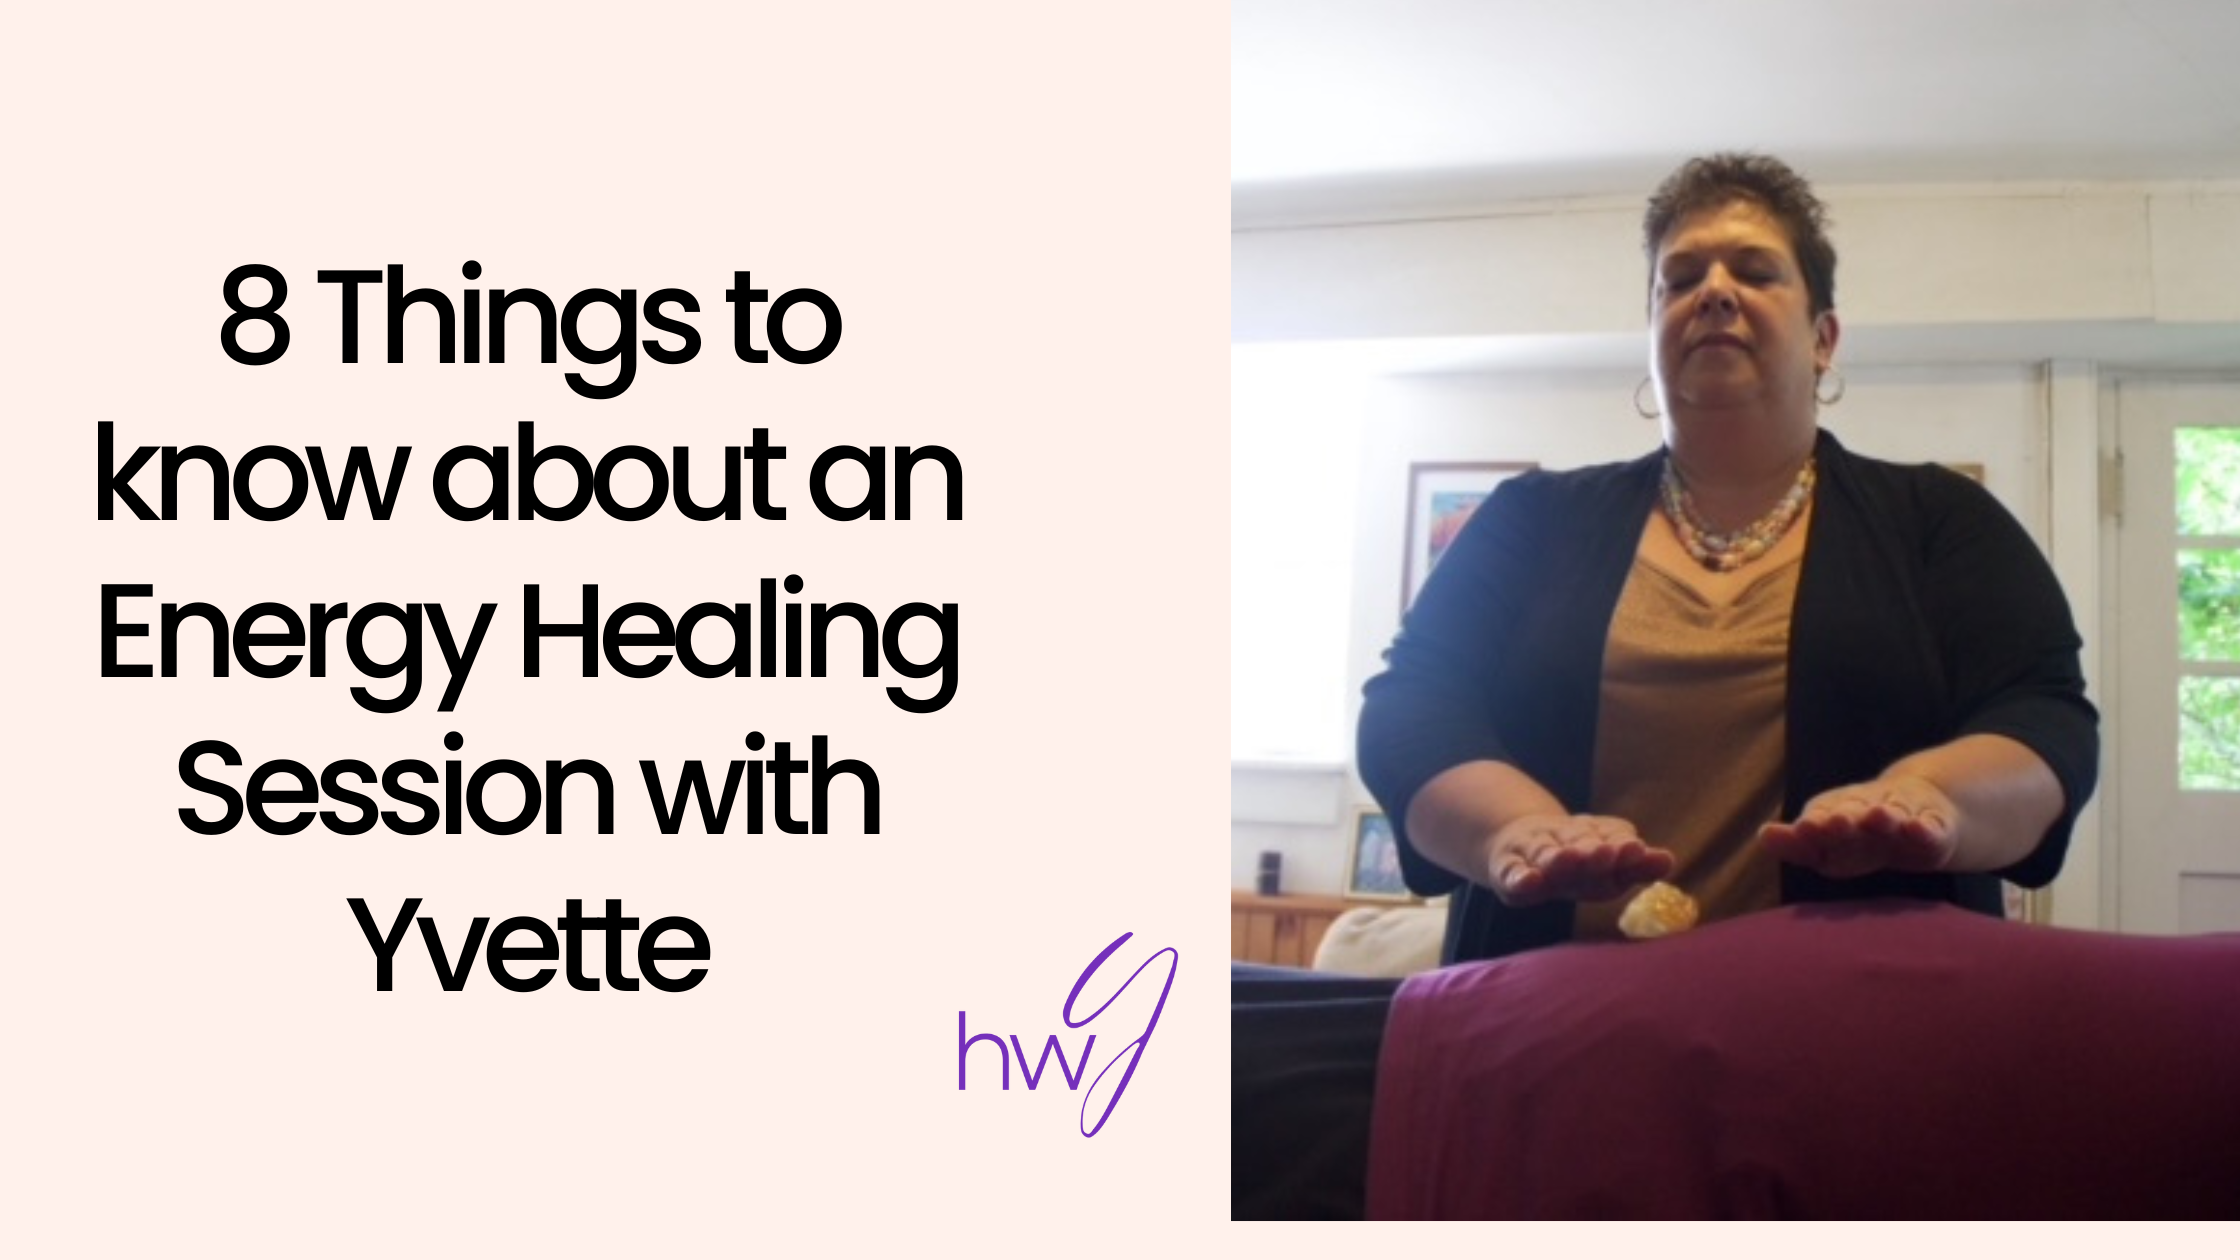 8 Things to know about an Energy Healing Session with Yvette